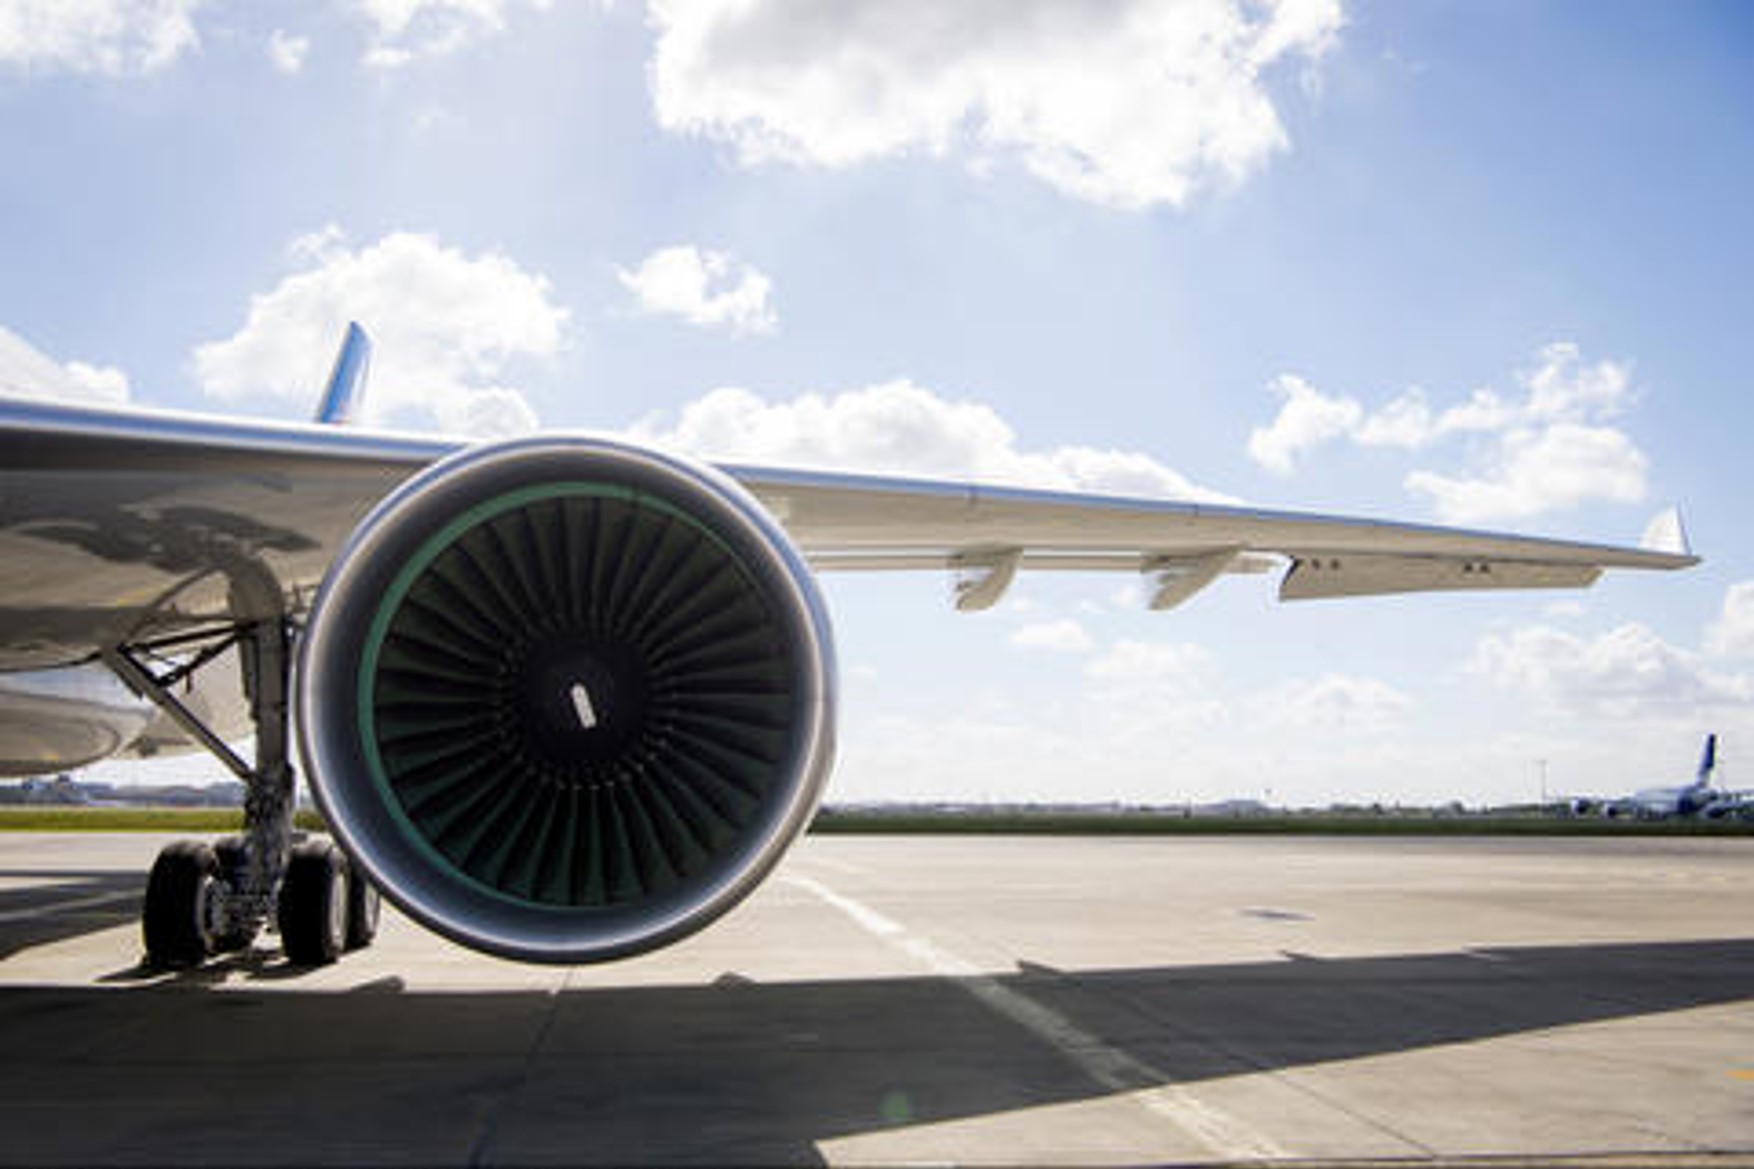 Rolls-Royce Trent 700 Engines Worth $930M Selected by International AirFinance Corporation